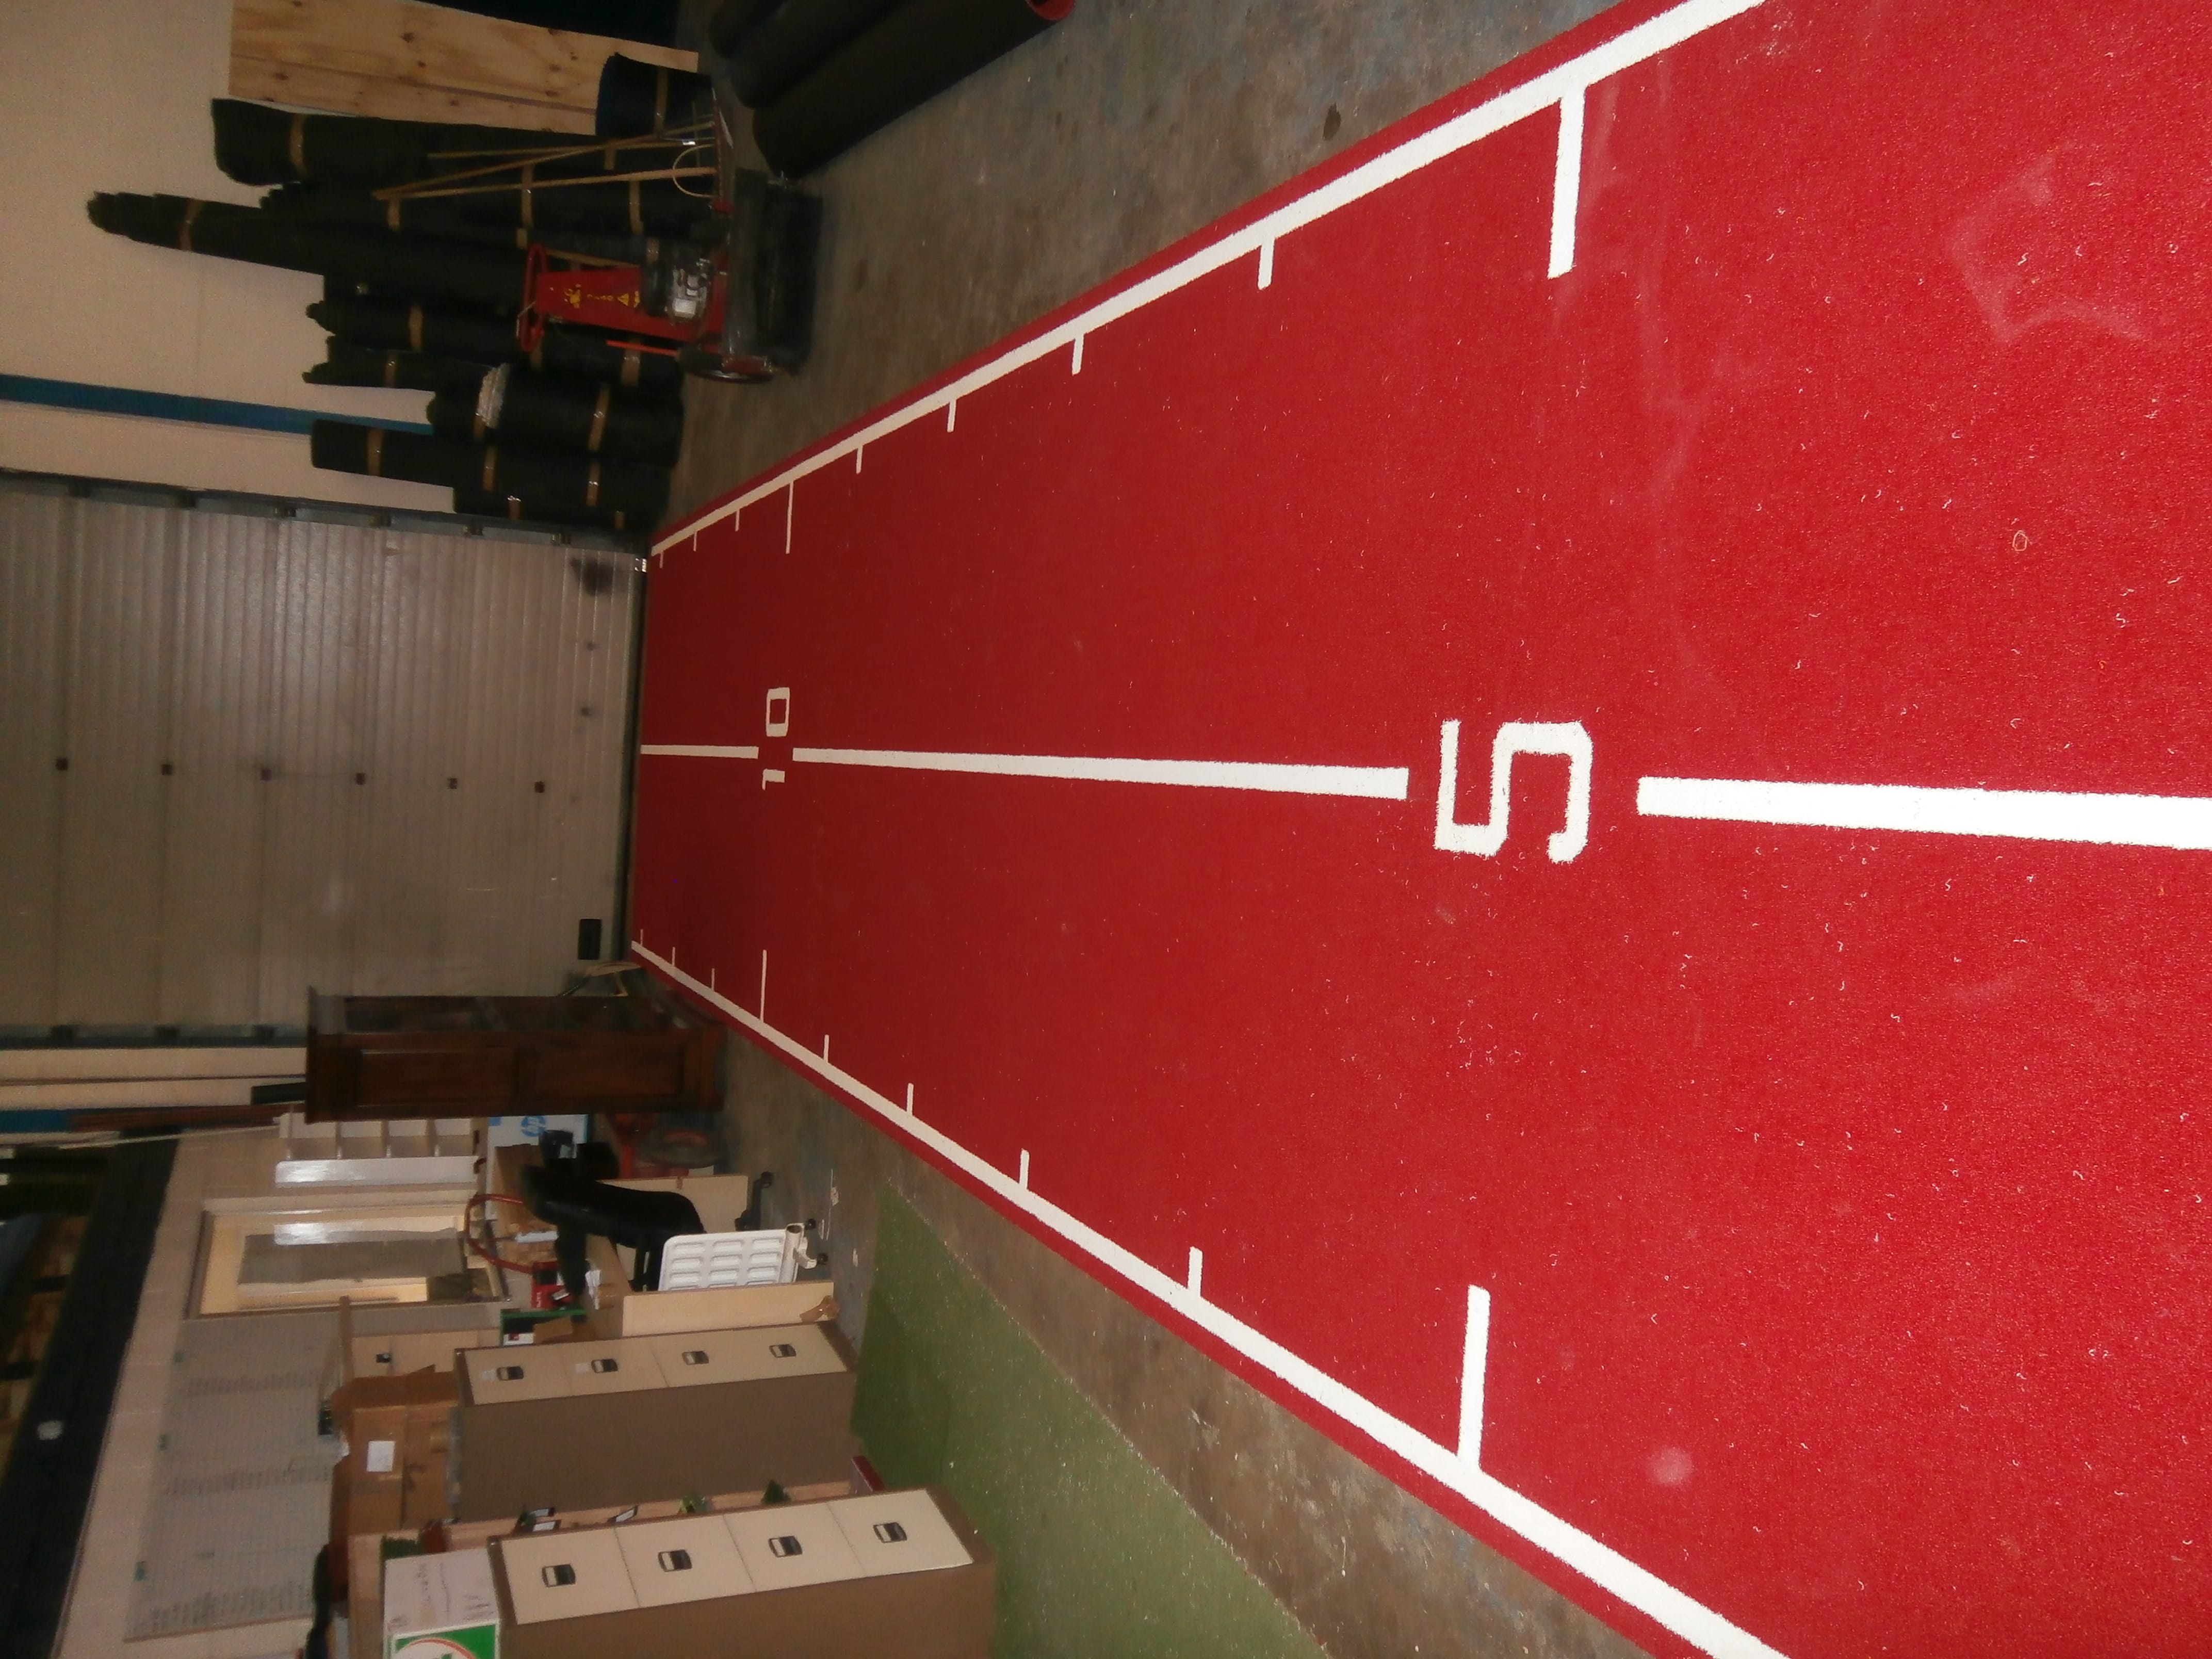 gym turf mat markings in white on red gym track